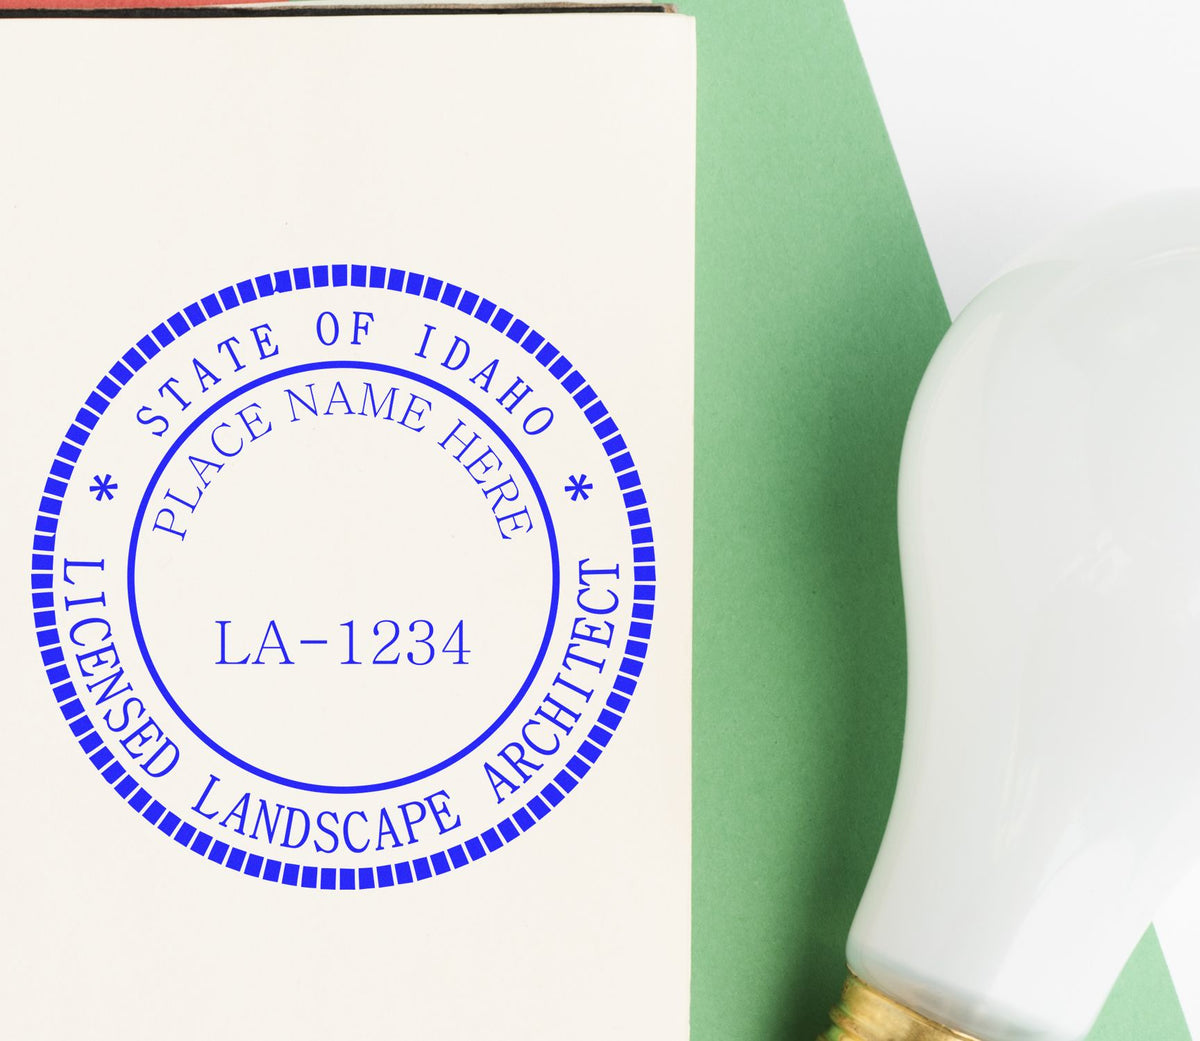 The Premium MaxLight Pre-Inked Idaho Landscape Architectural Stamp stamp impression comes to life with a crisp, detailed photo on paper - showcasing true professional quality.